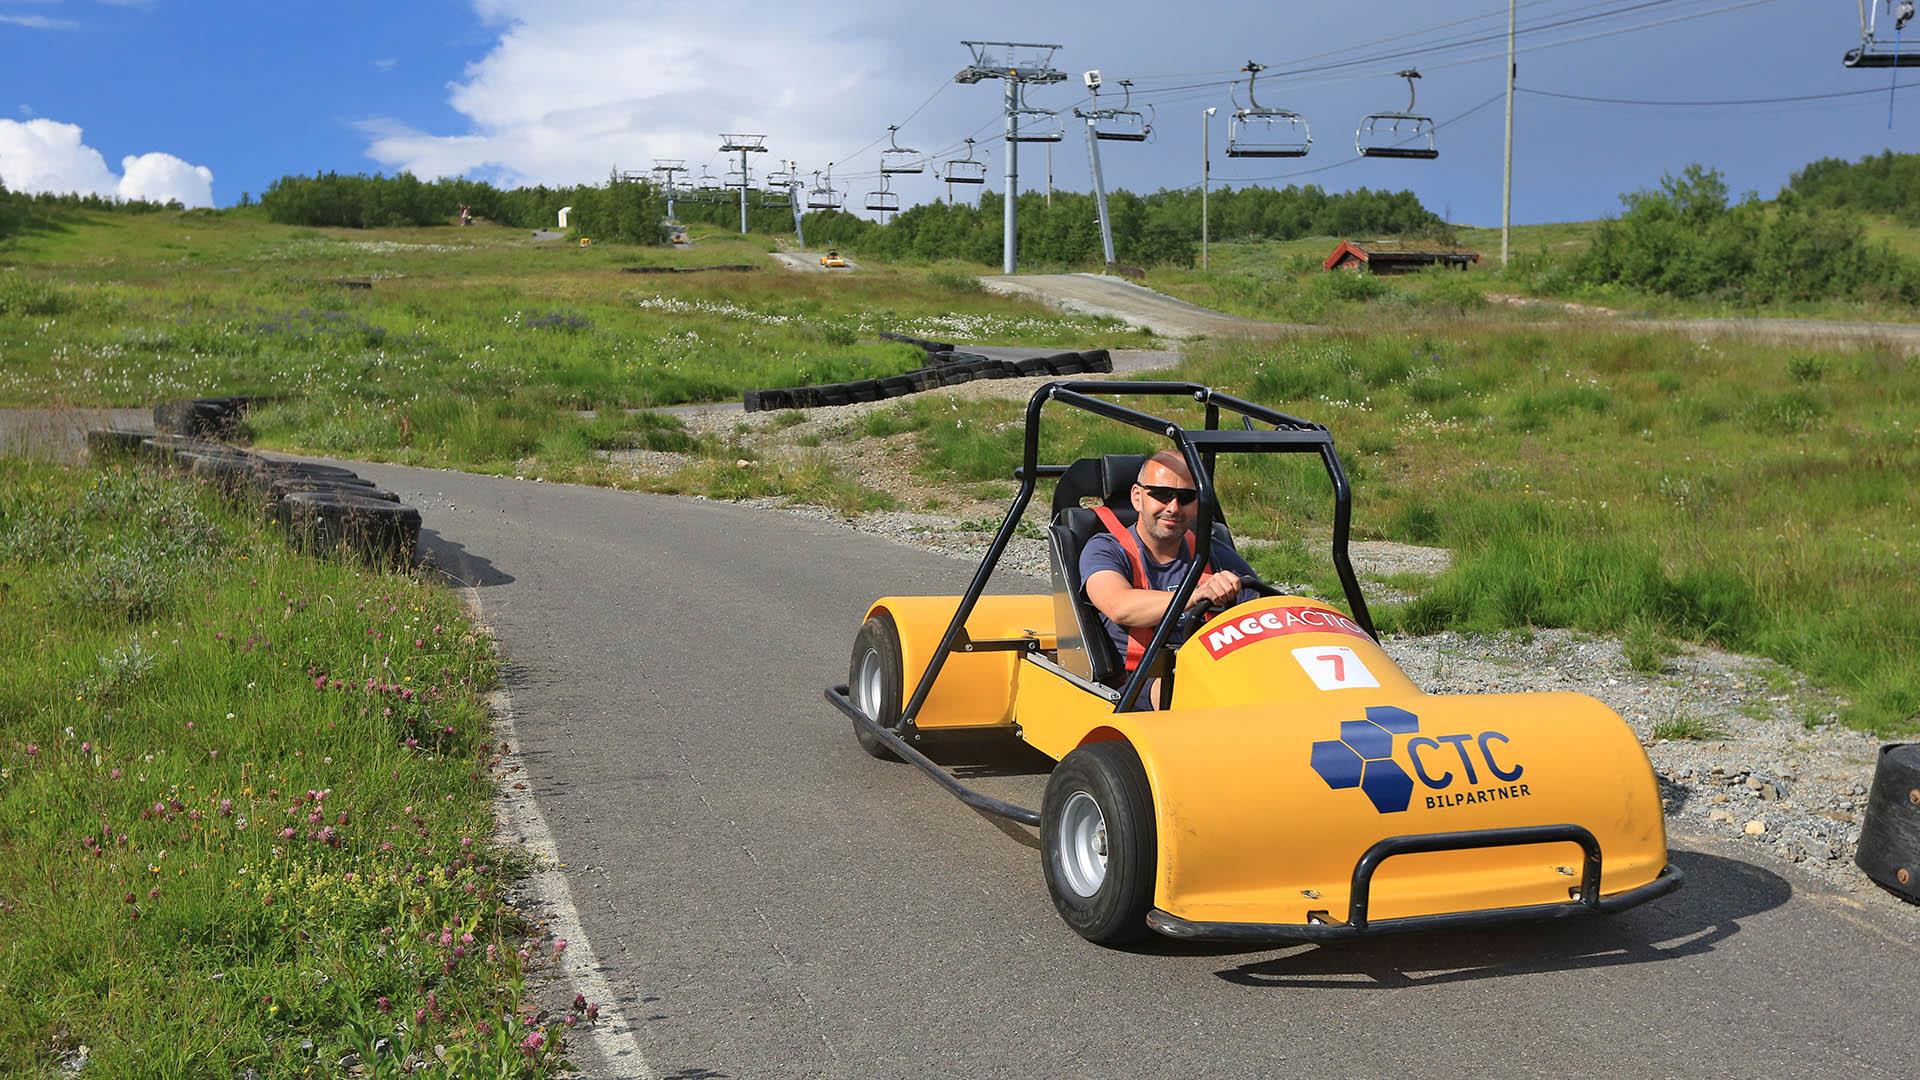 A man steers a yellow go-cart in a paved downhill-track. A summer ski lift can be seen in the background.